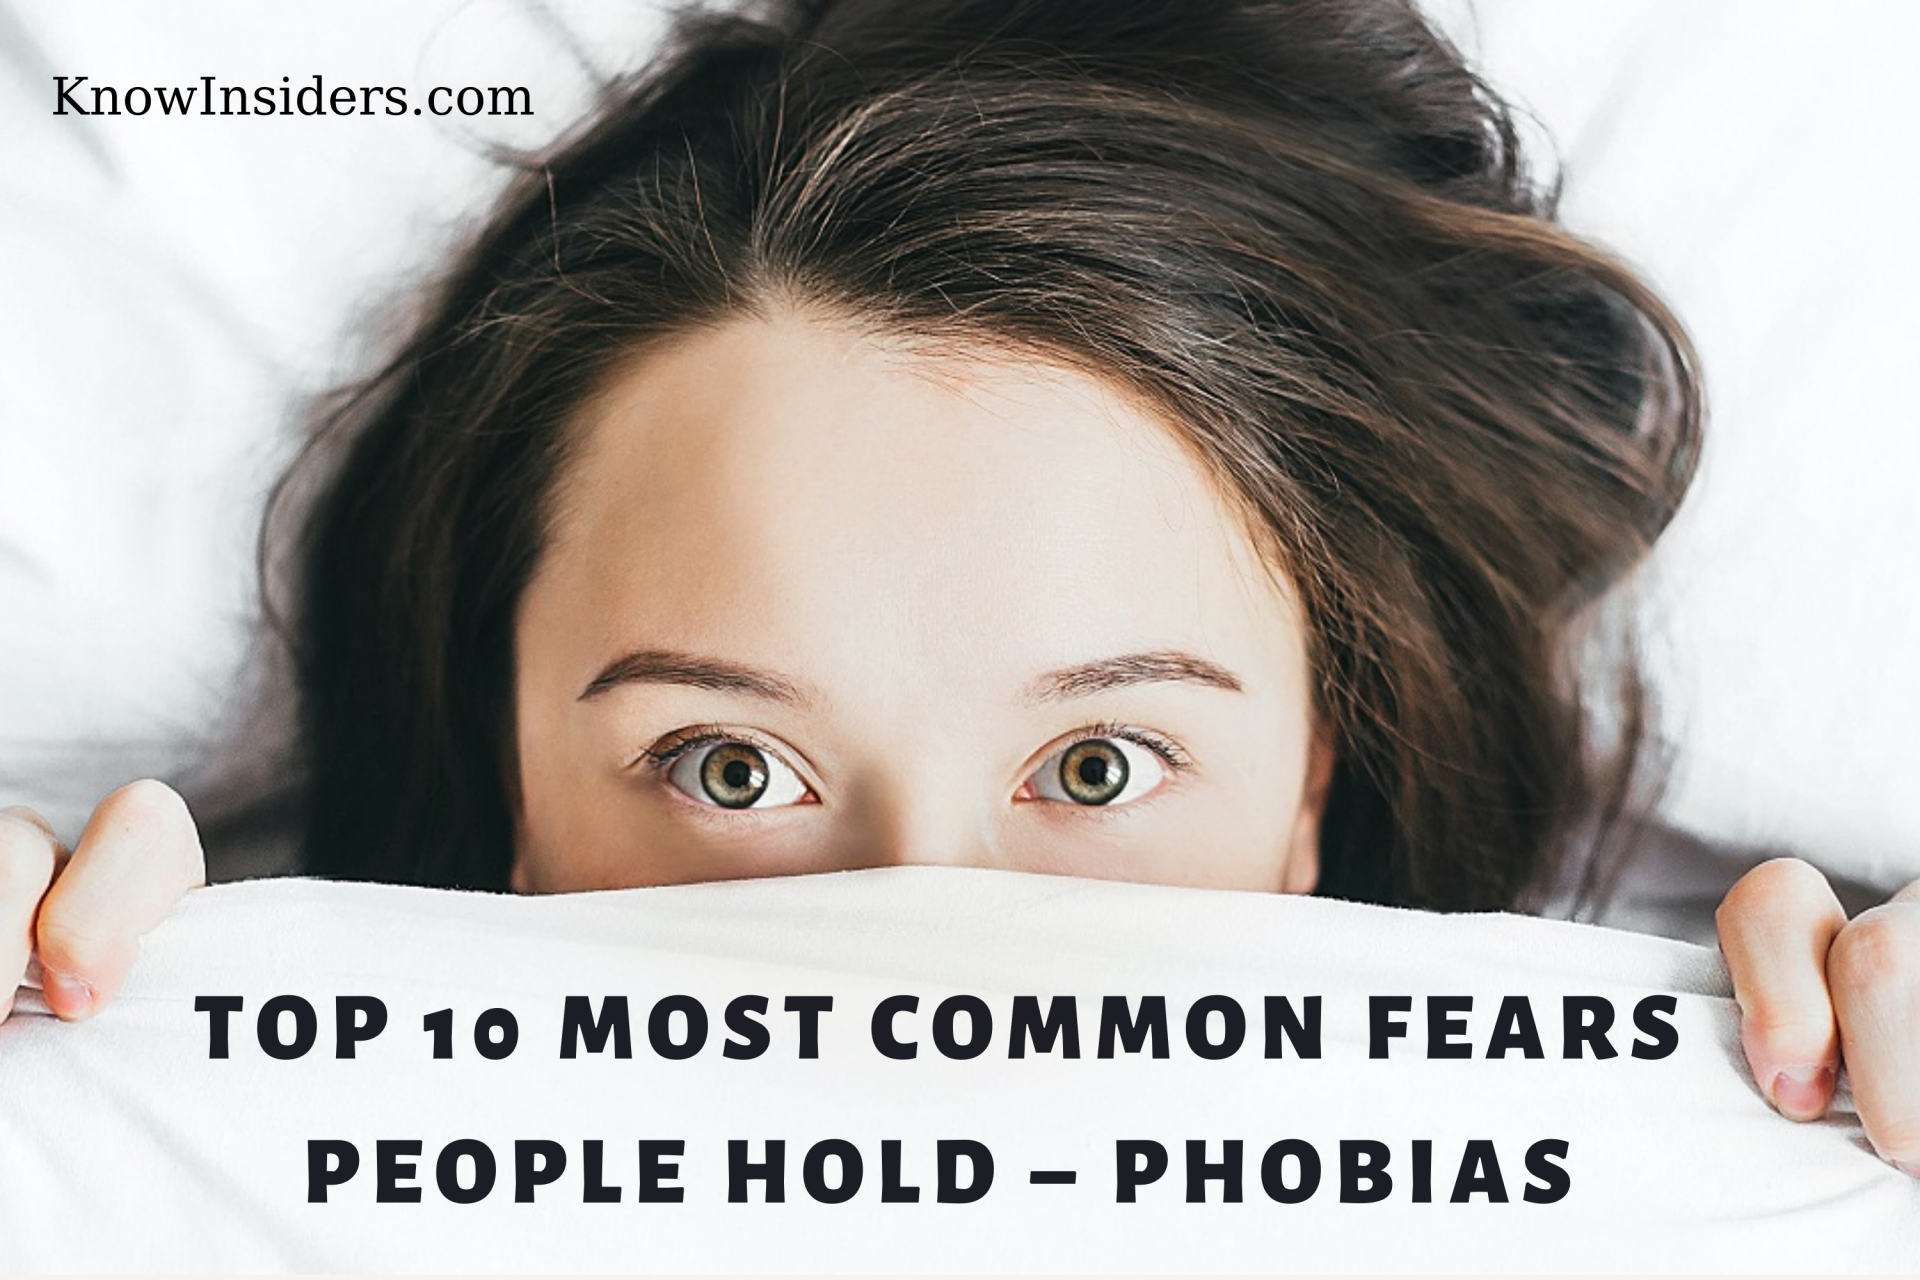 Phobias - Top 10 Most Common Fears People Hold